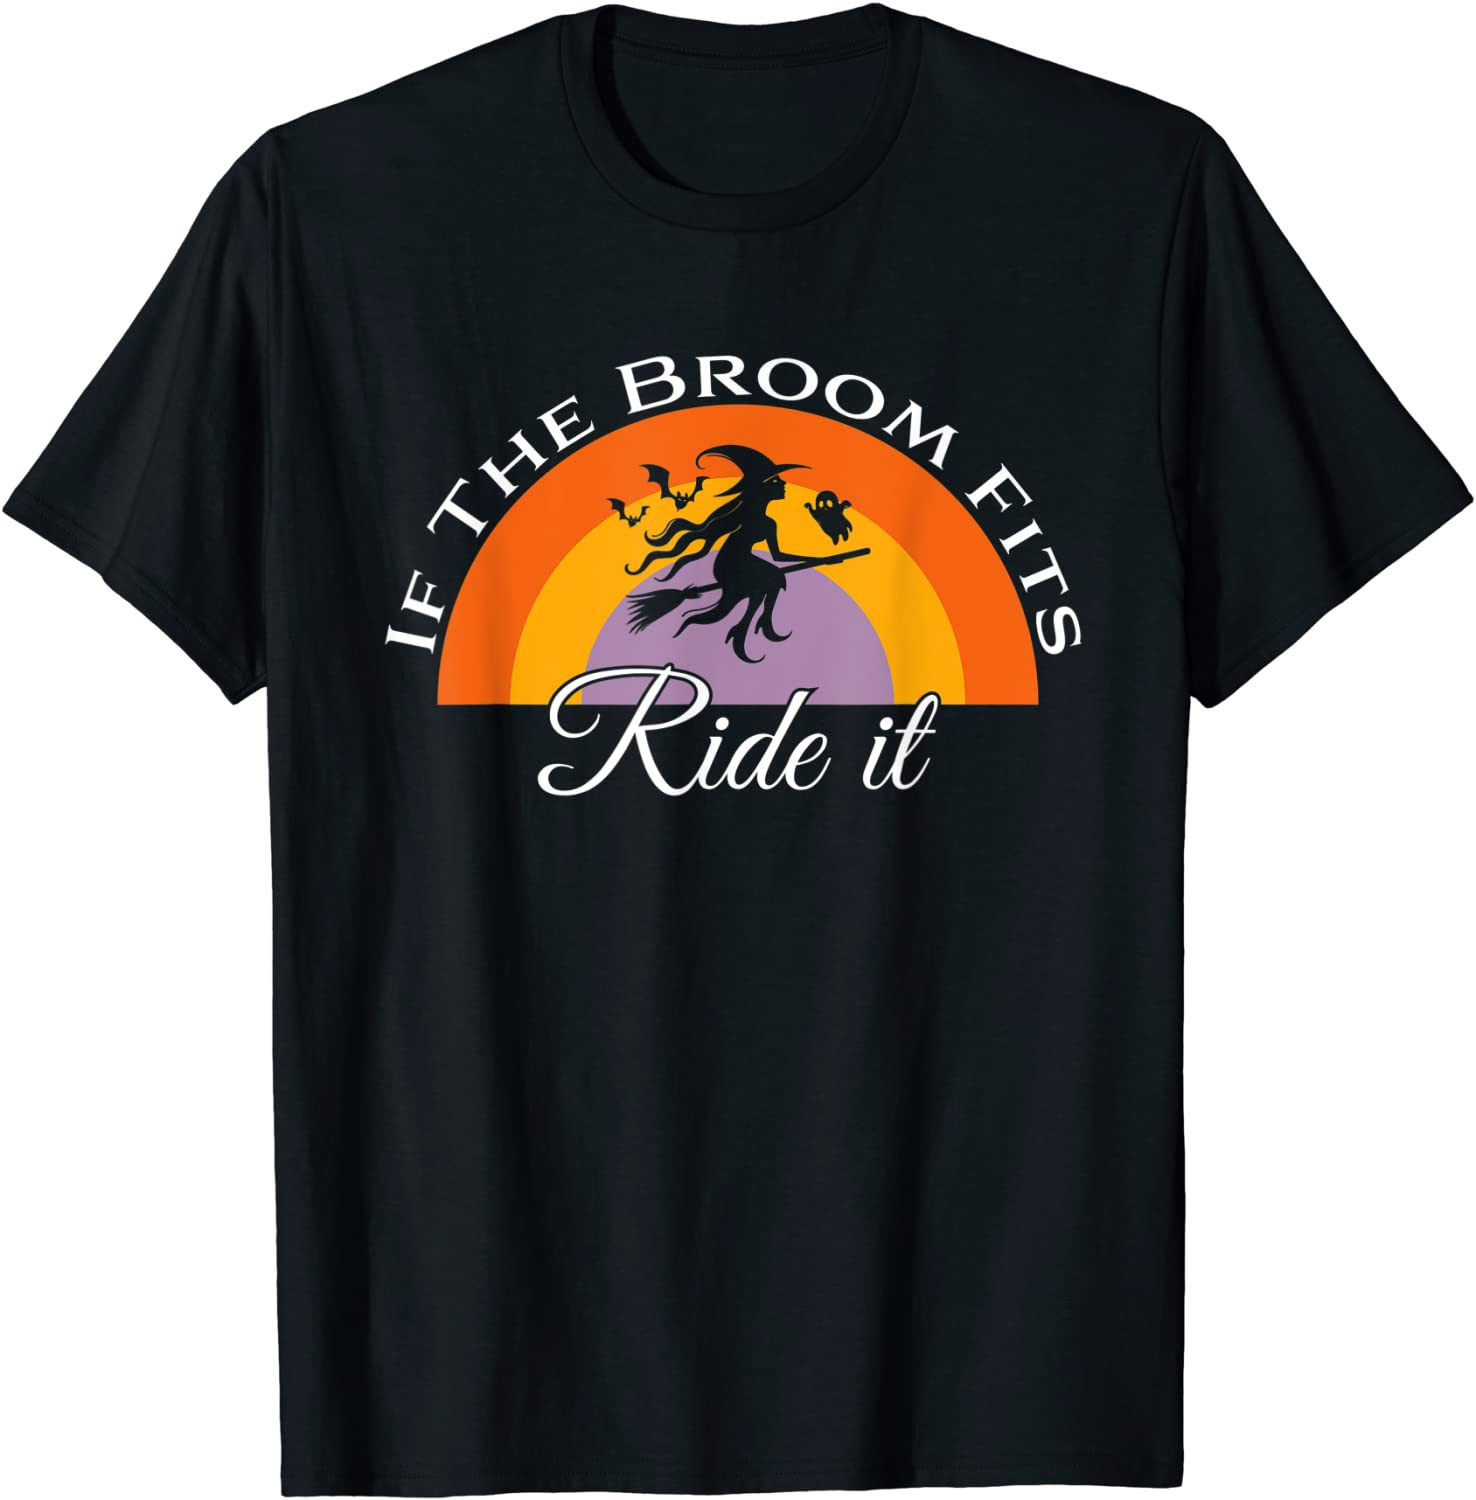 If The Broom Fits, Ride It Halloween T-Shirt